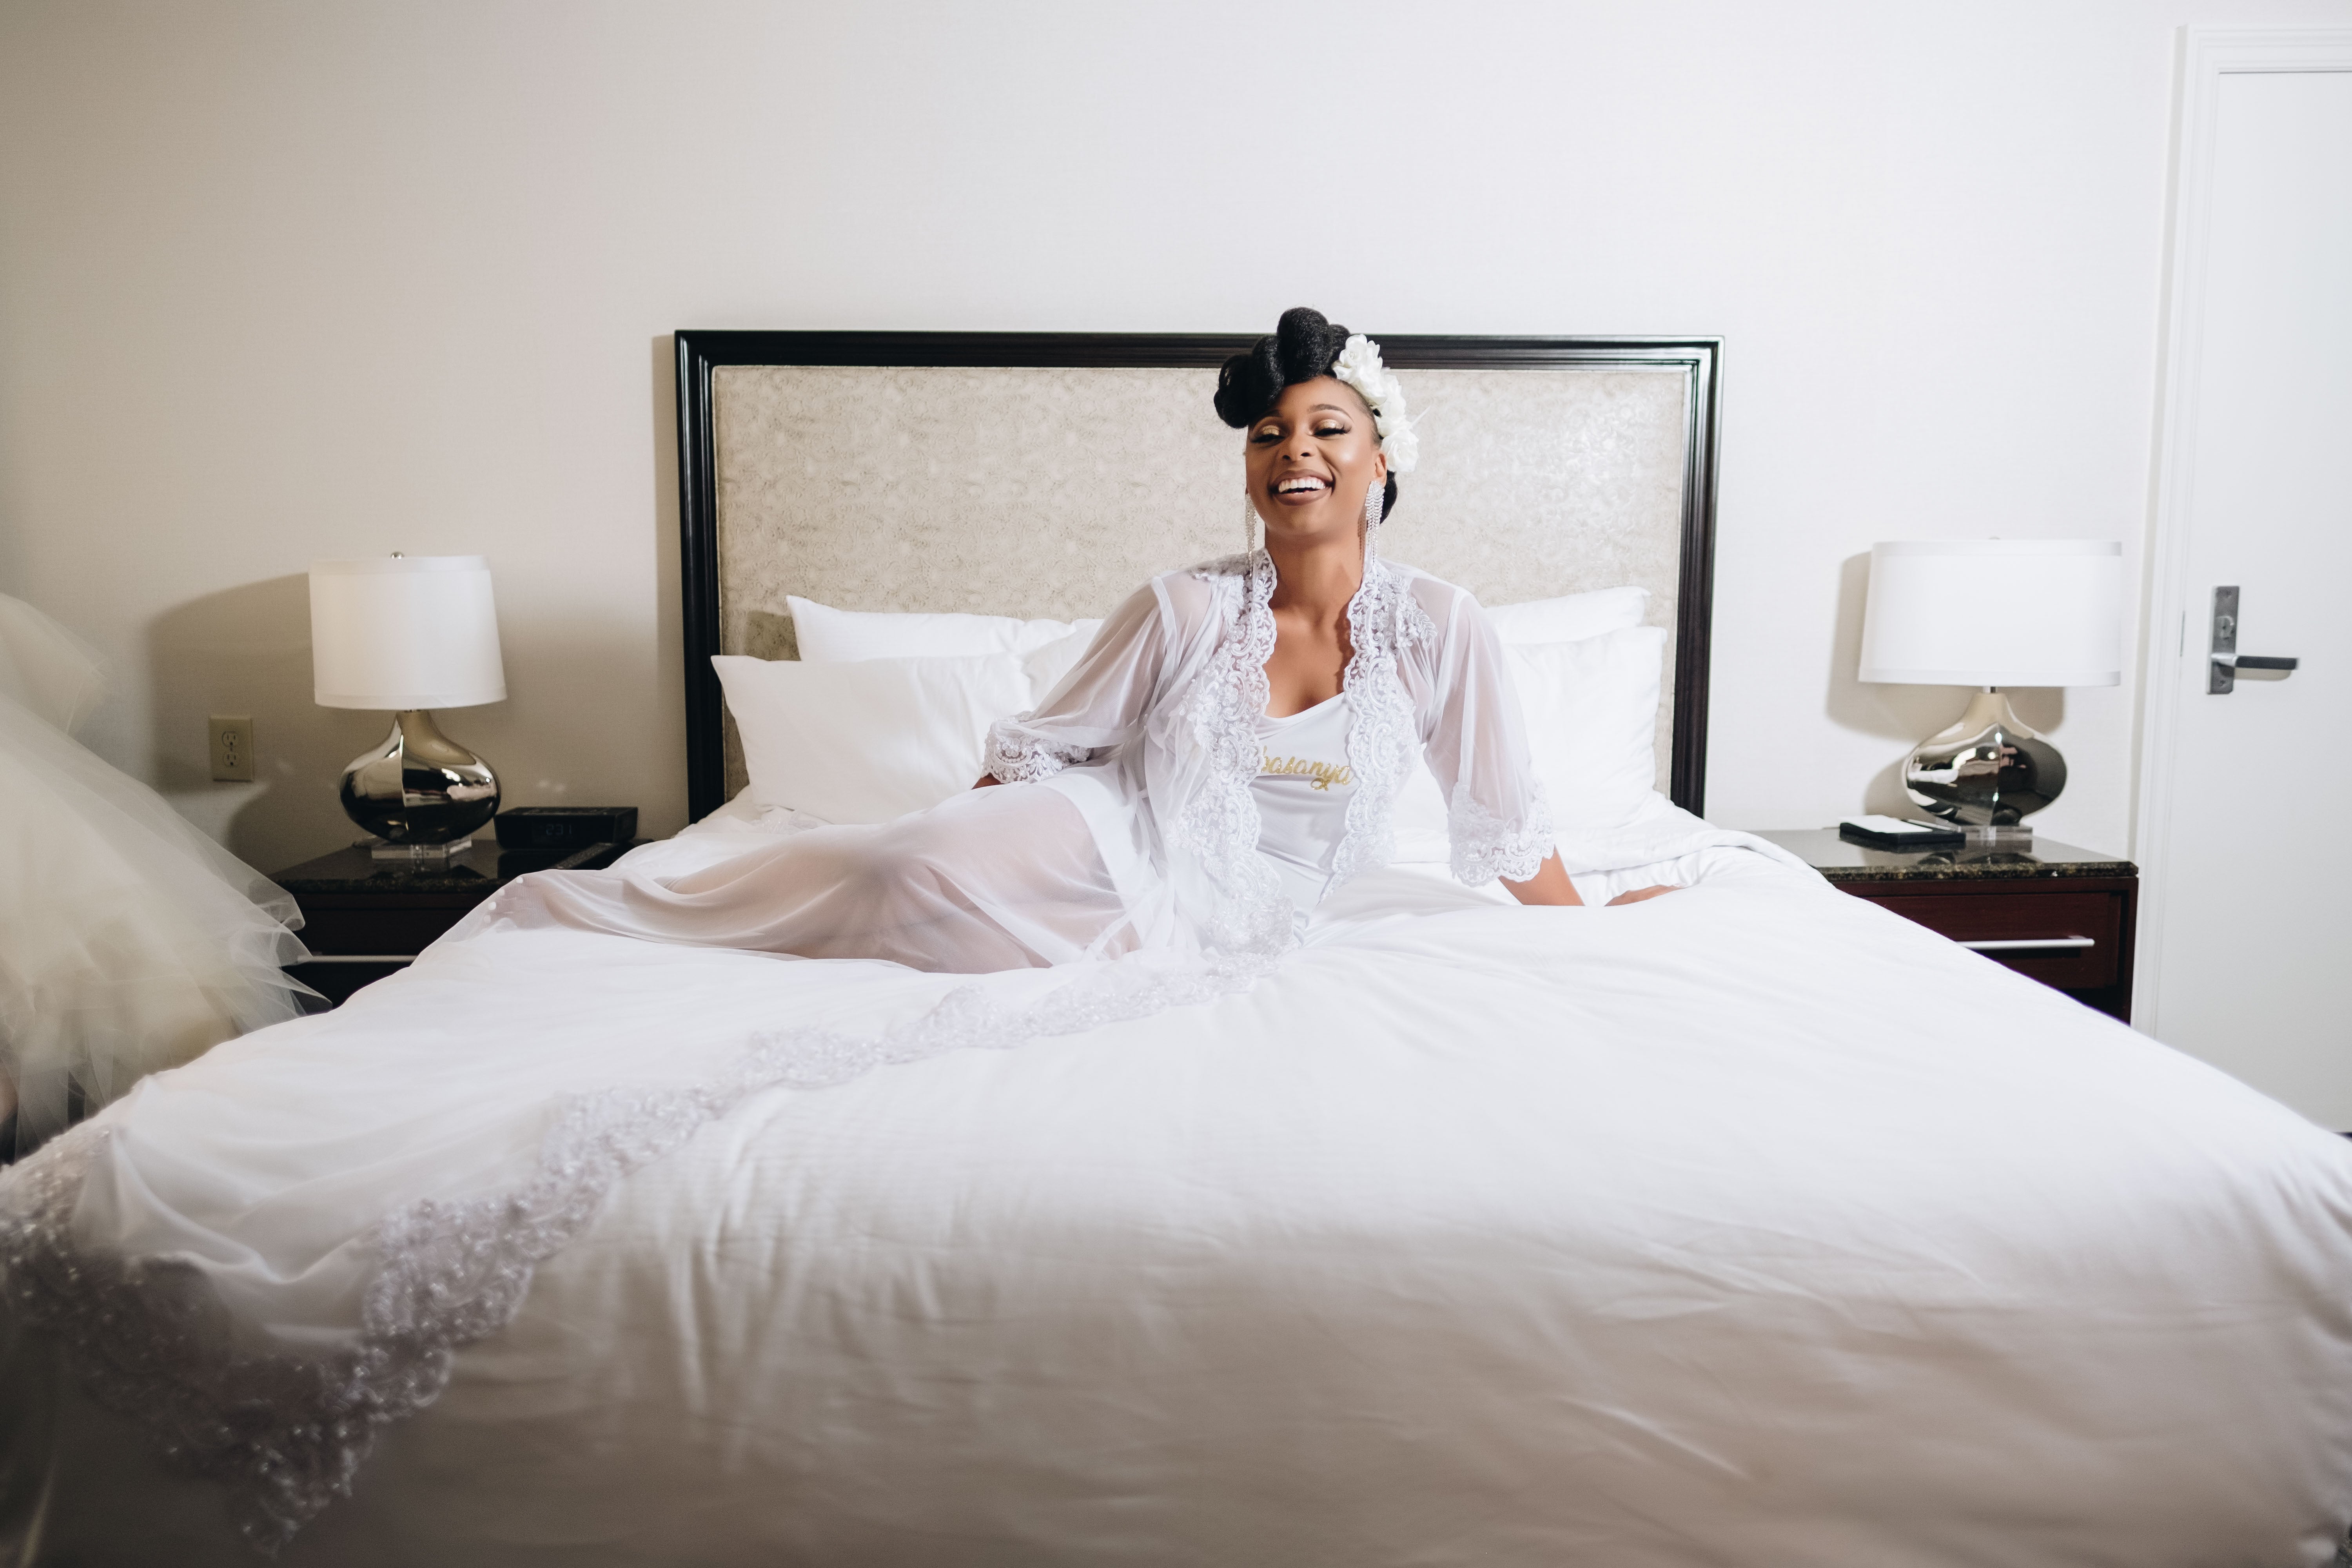 Bridal Bliss: Crystal and Olayinka's Wedding Overflowed With Tradition and Love